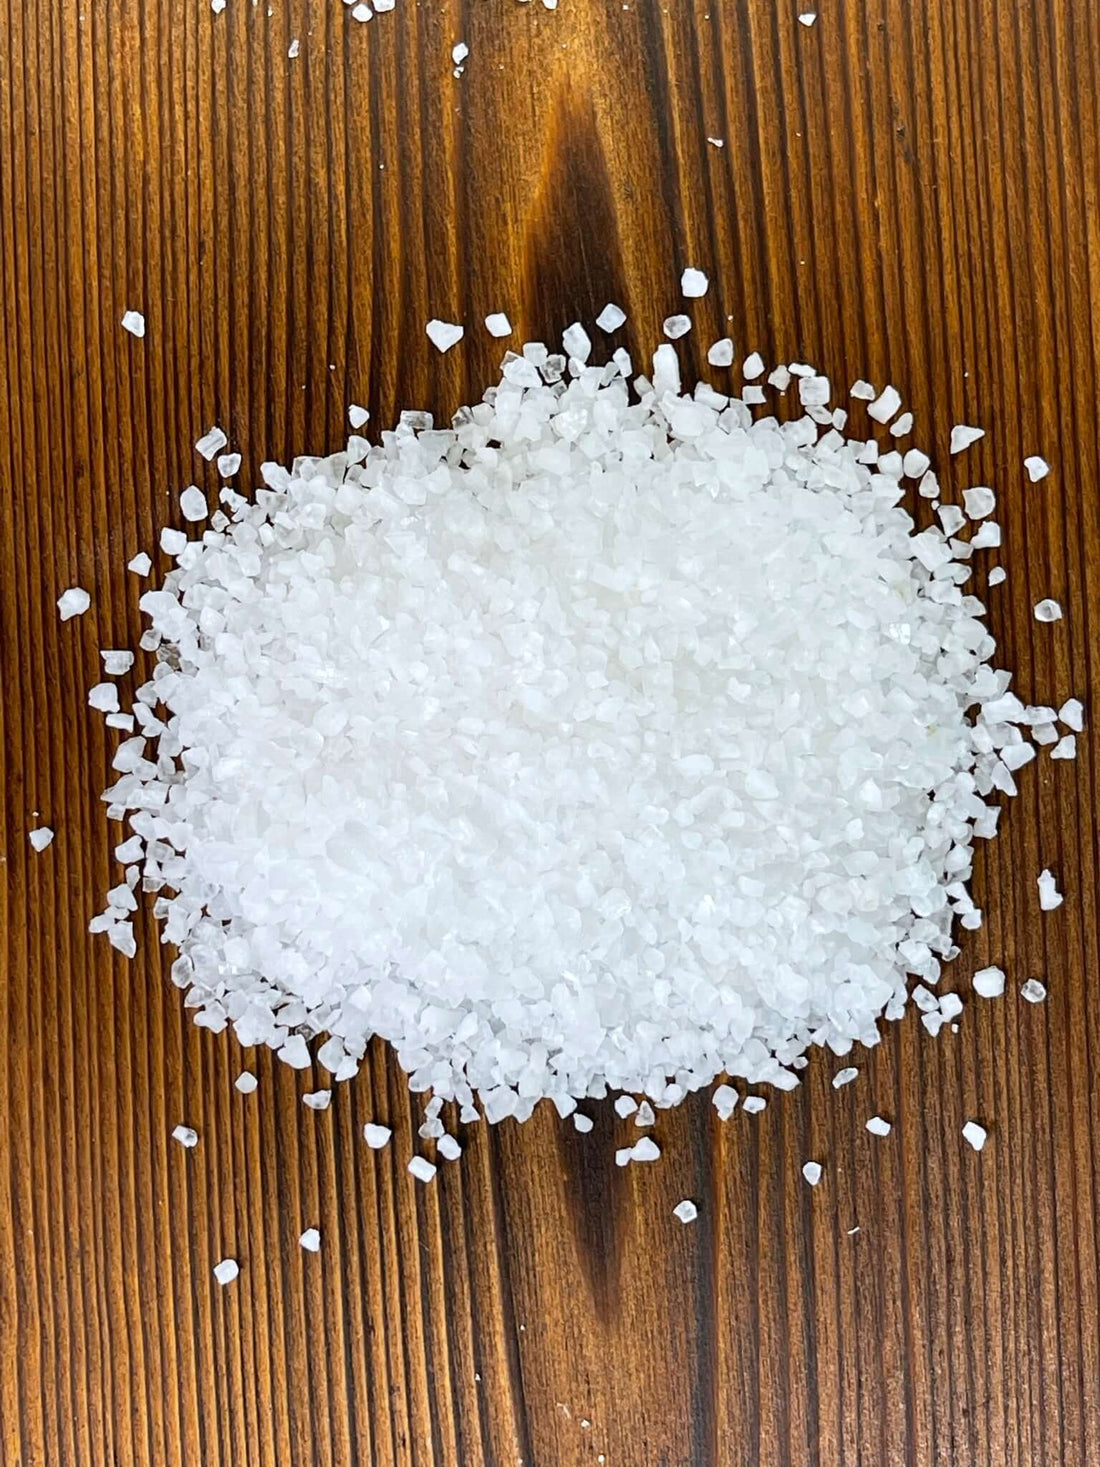 What are the most common types of salt used for food?